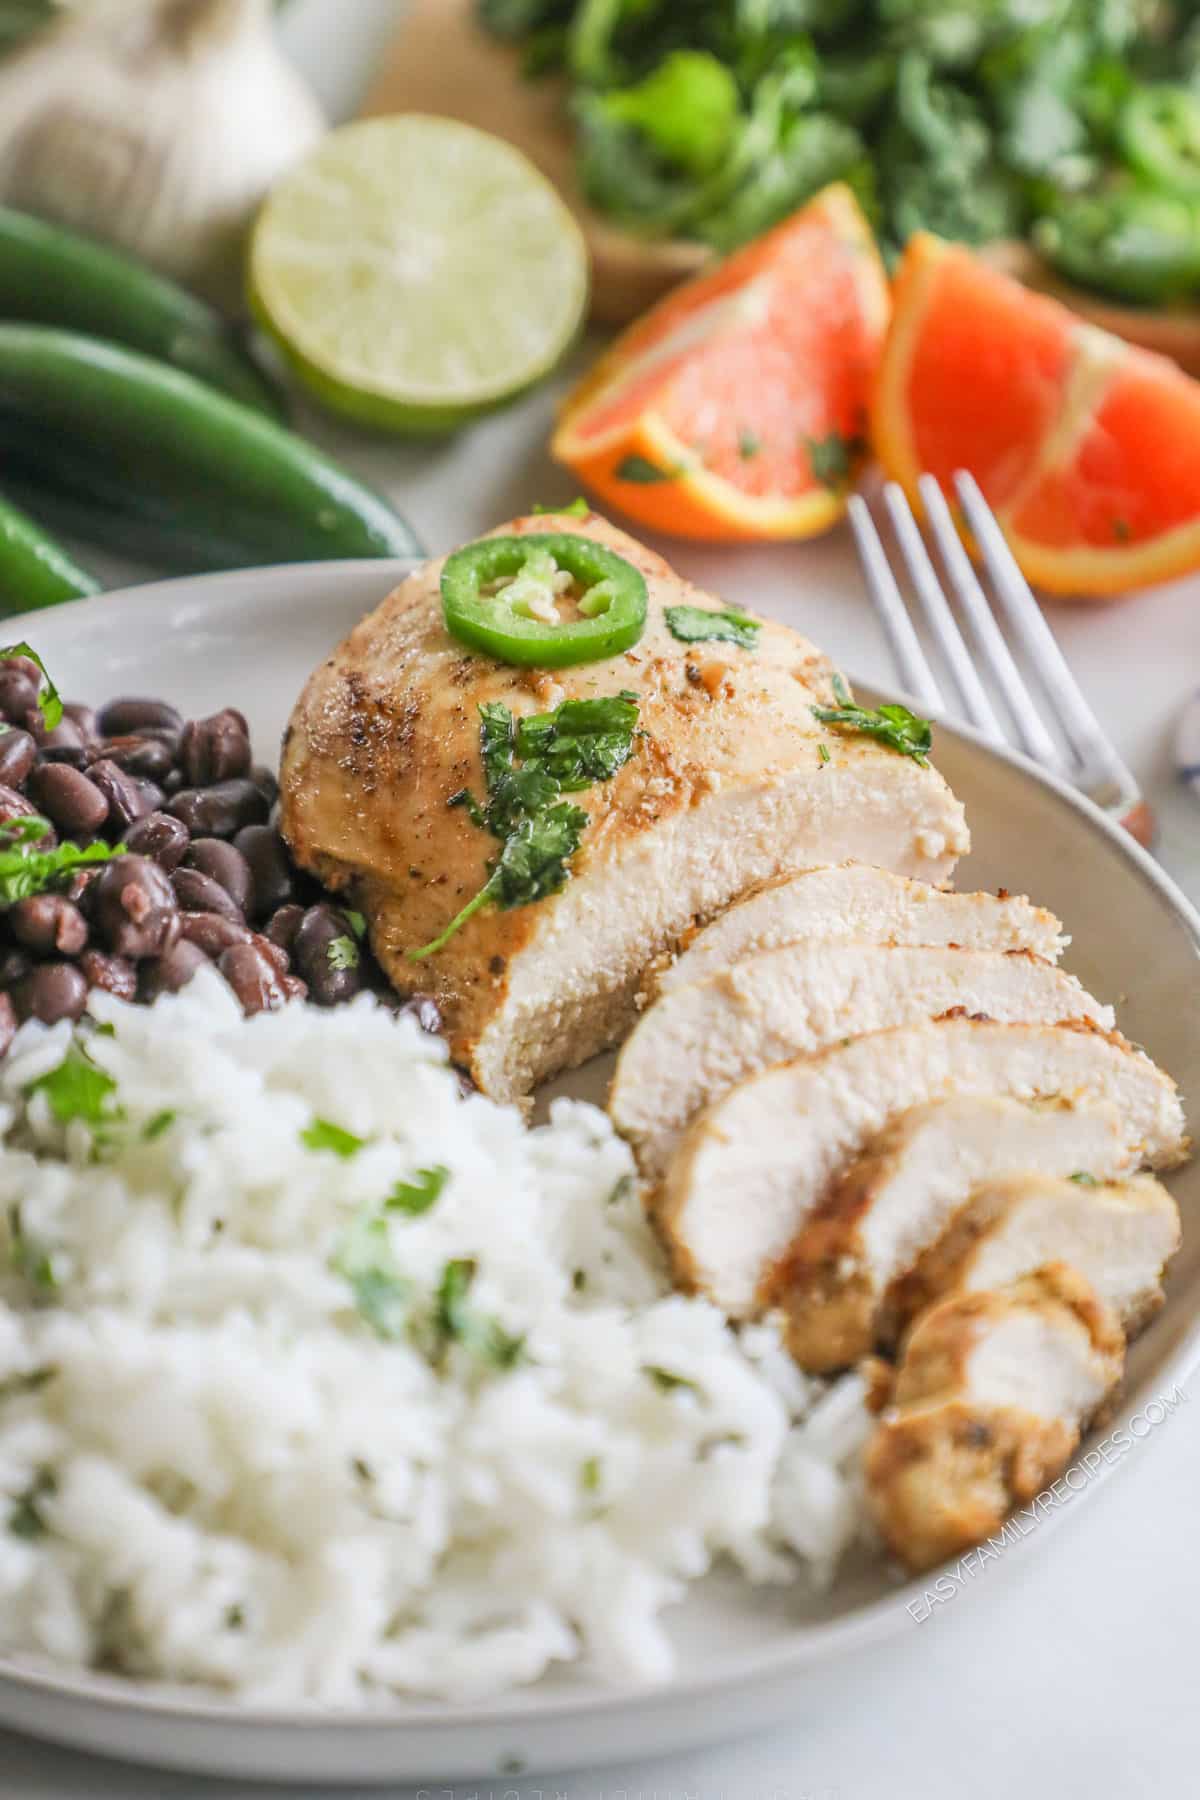 Baja Chicken sliced on a plate with rice and beans. Citrus is in the background.